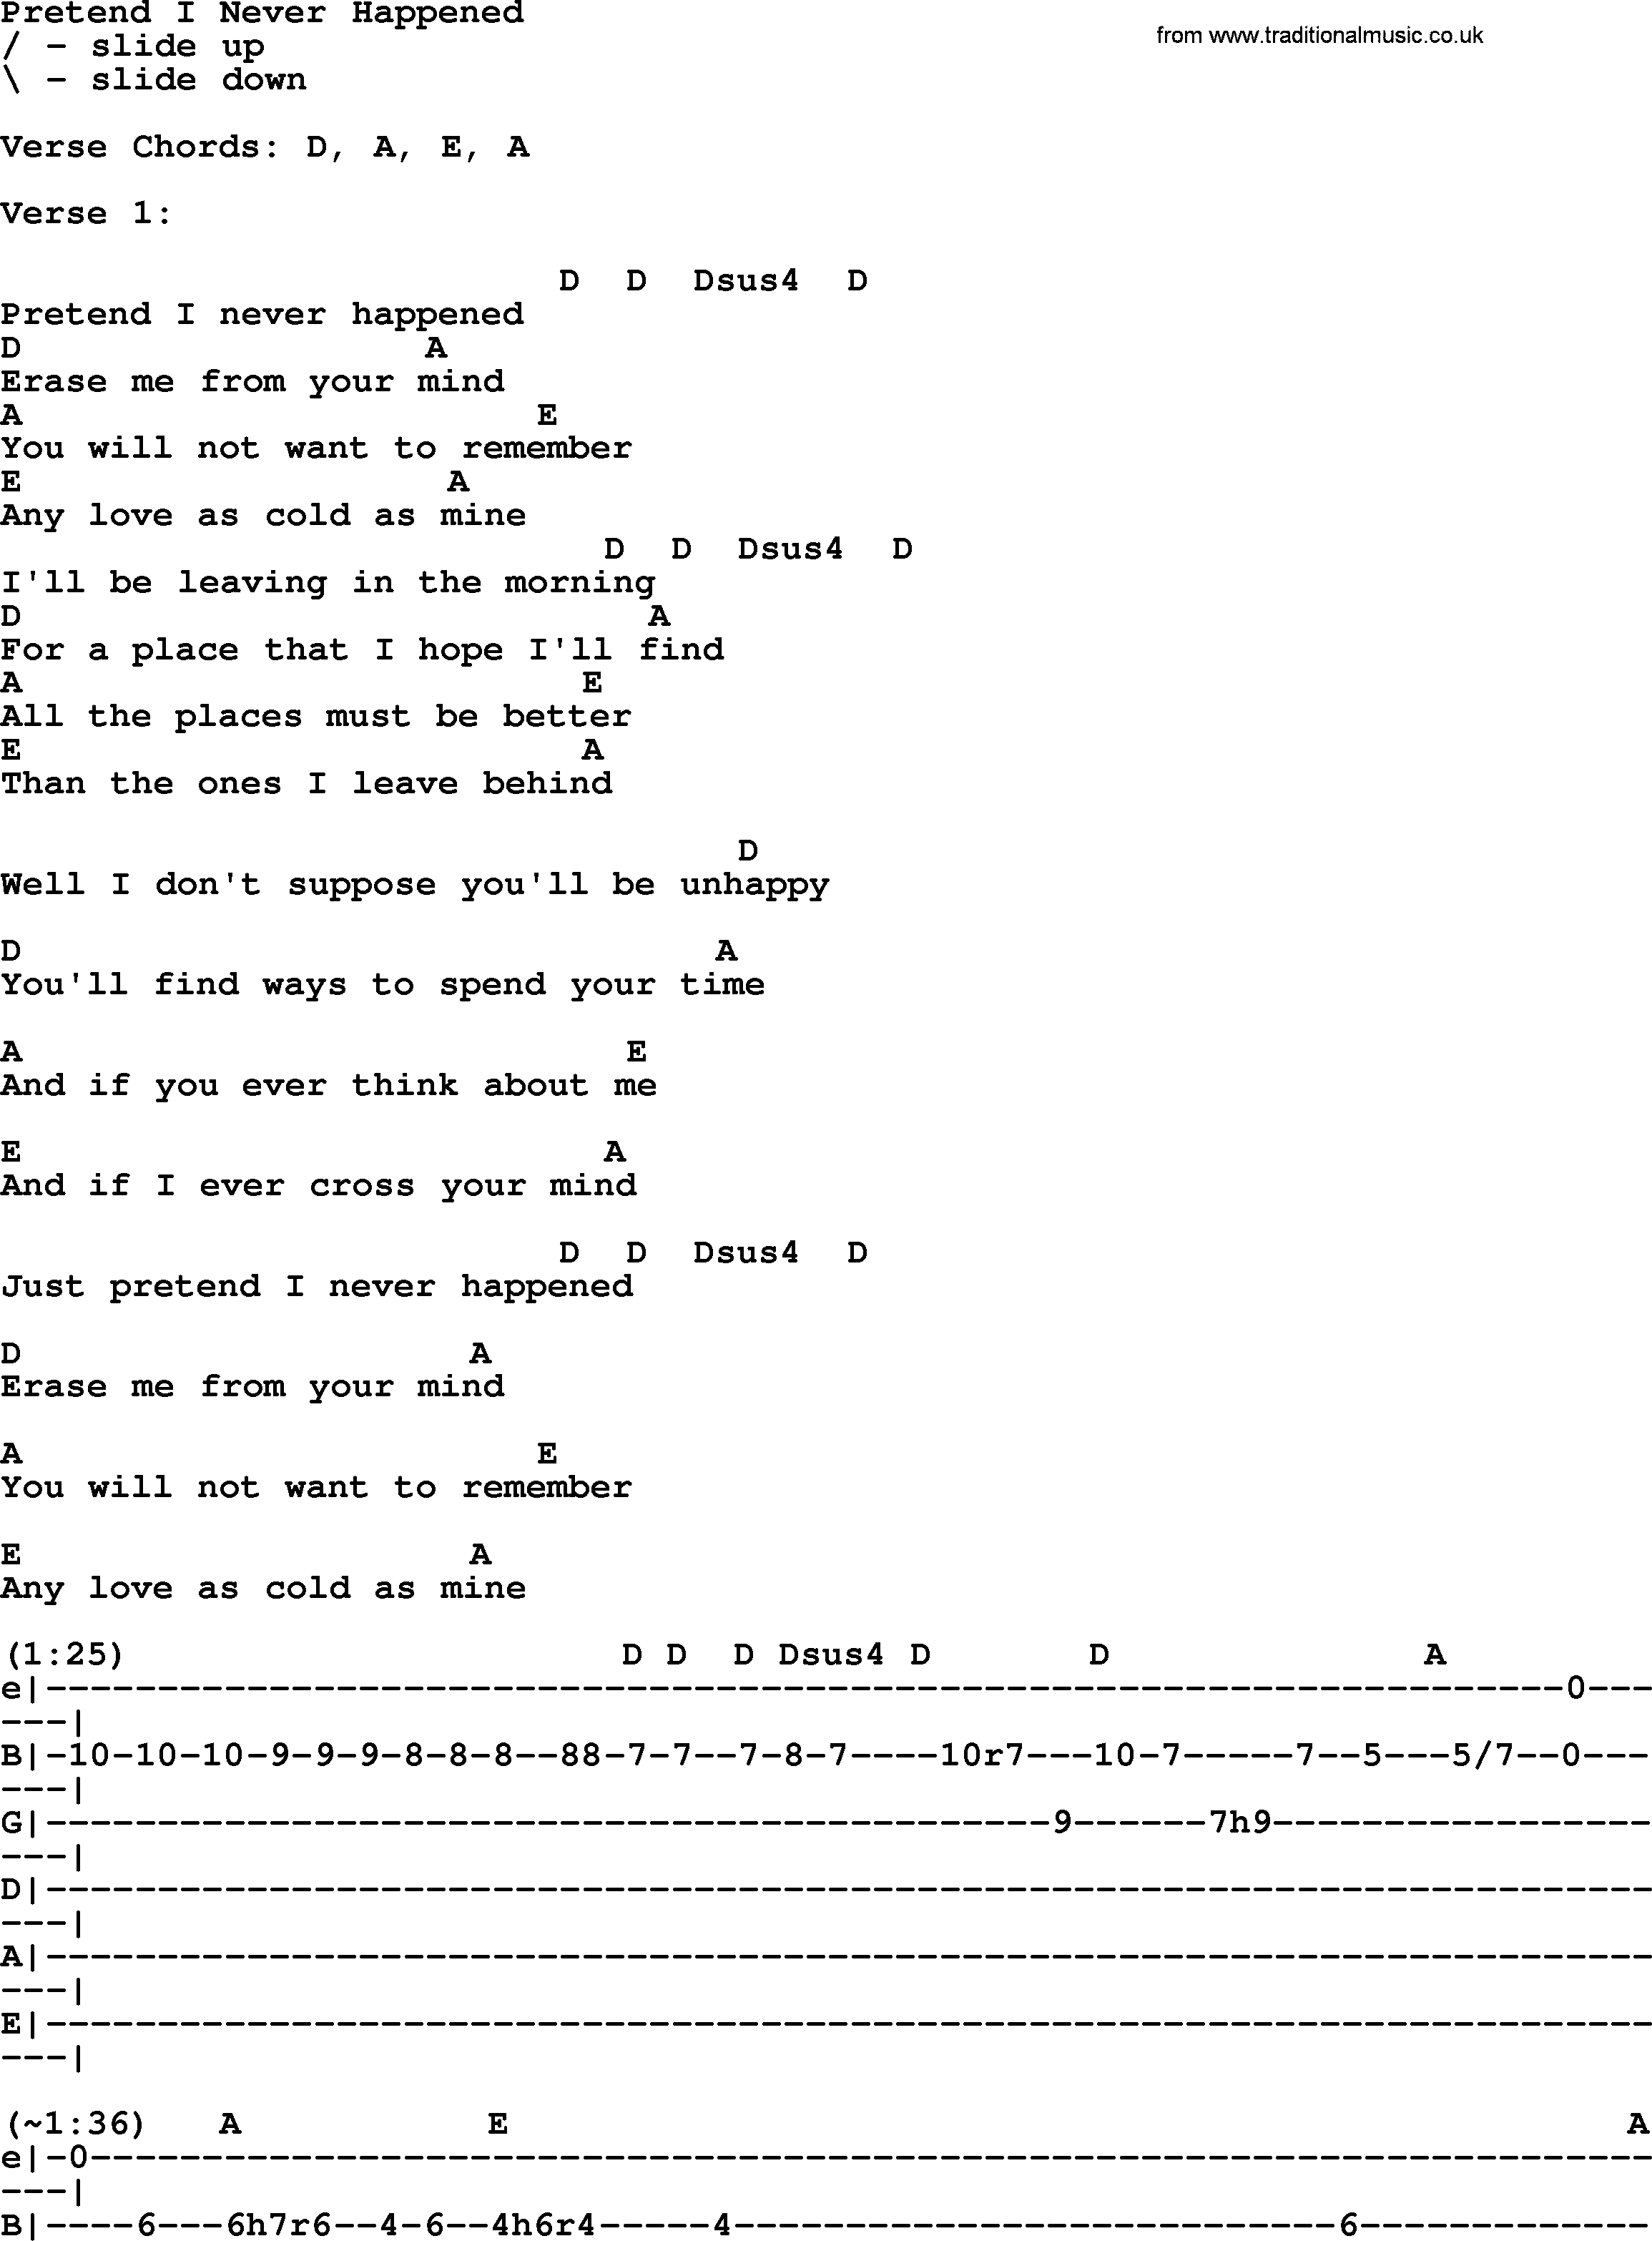 Willie Nelson song: Pretend I Never Happened, lyrics and chords